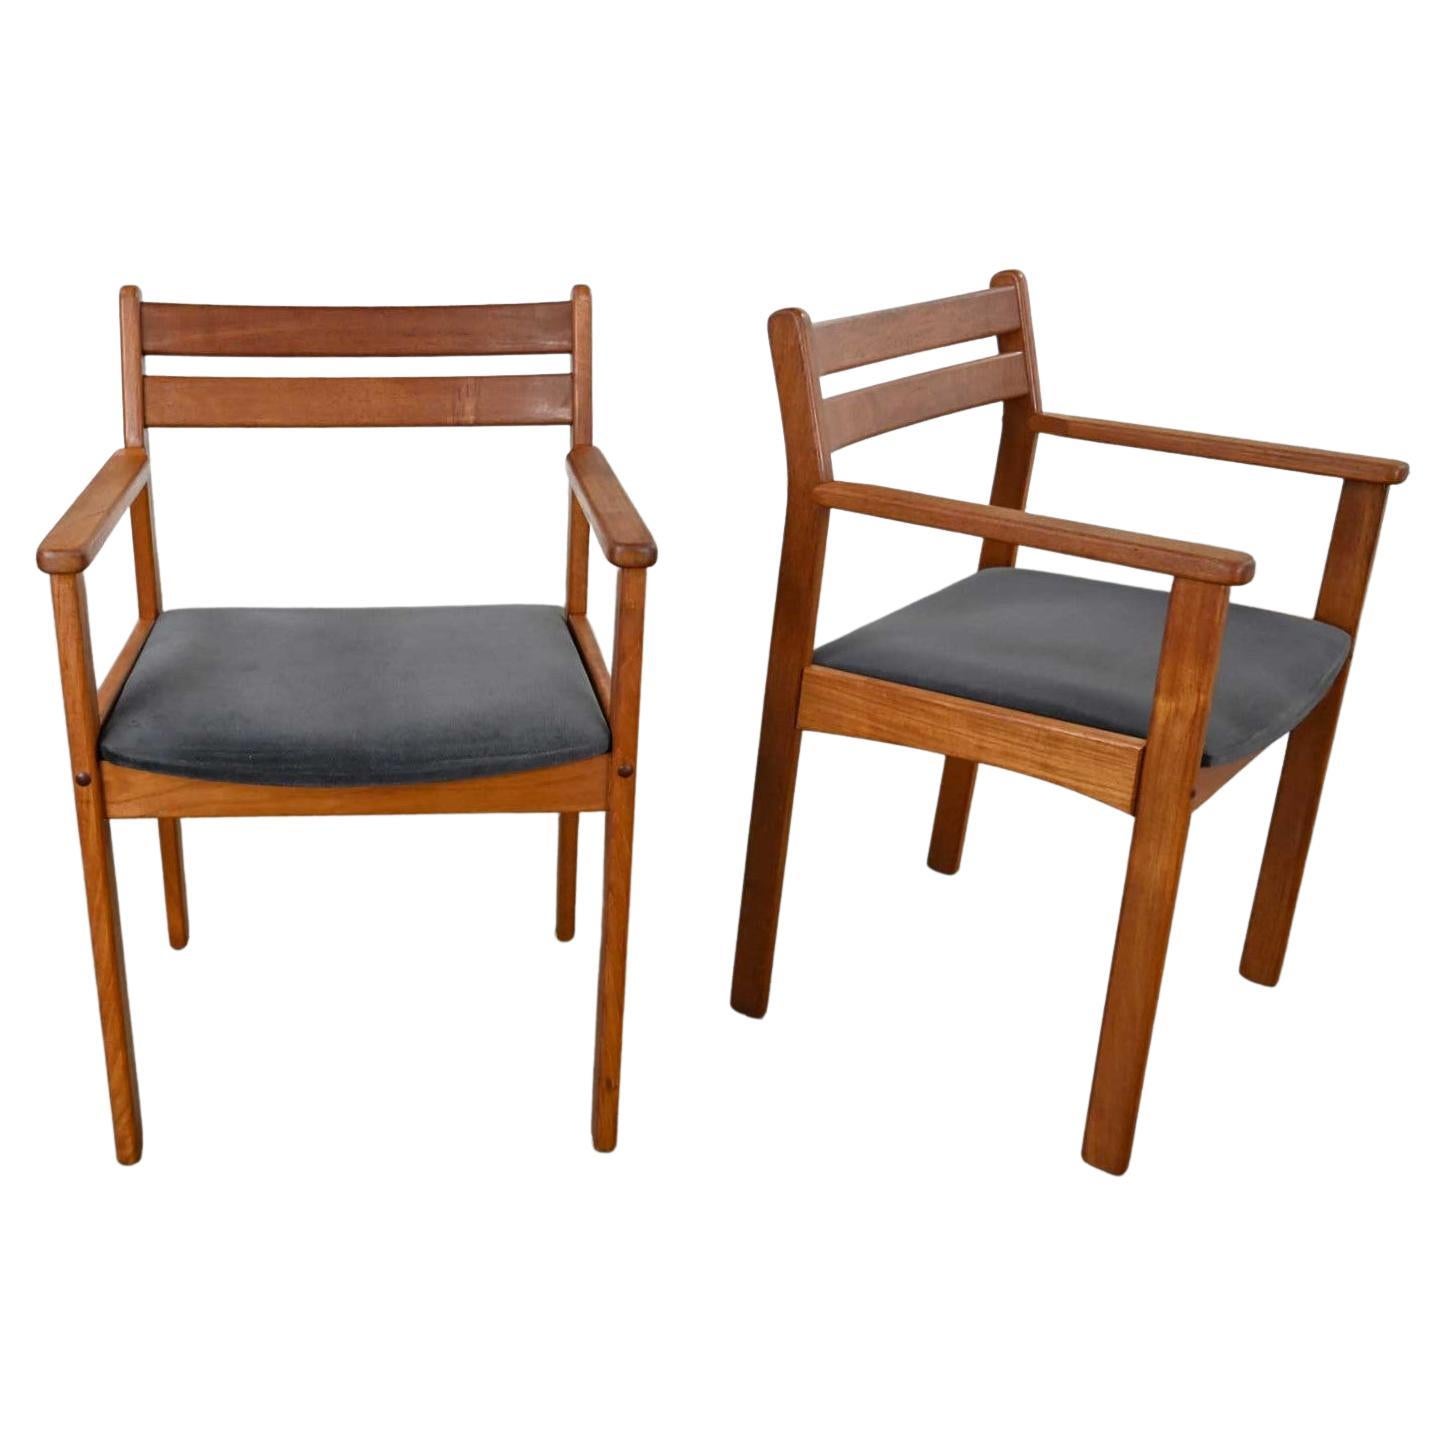 Scandinavian Modern Teak Pair of Armchairs with Brushed Charcoal Fabric Seats For Sale